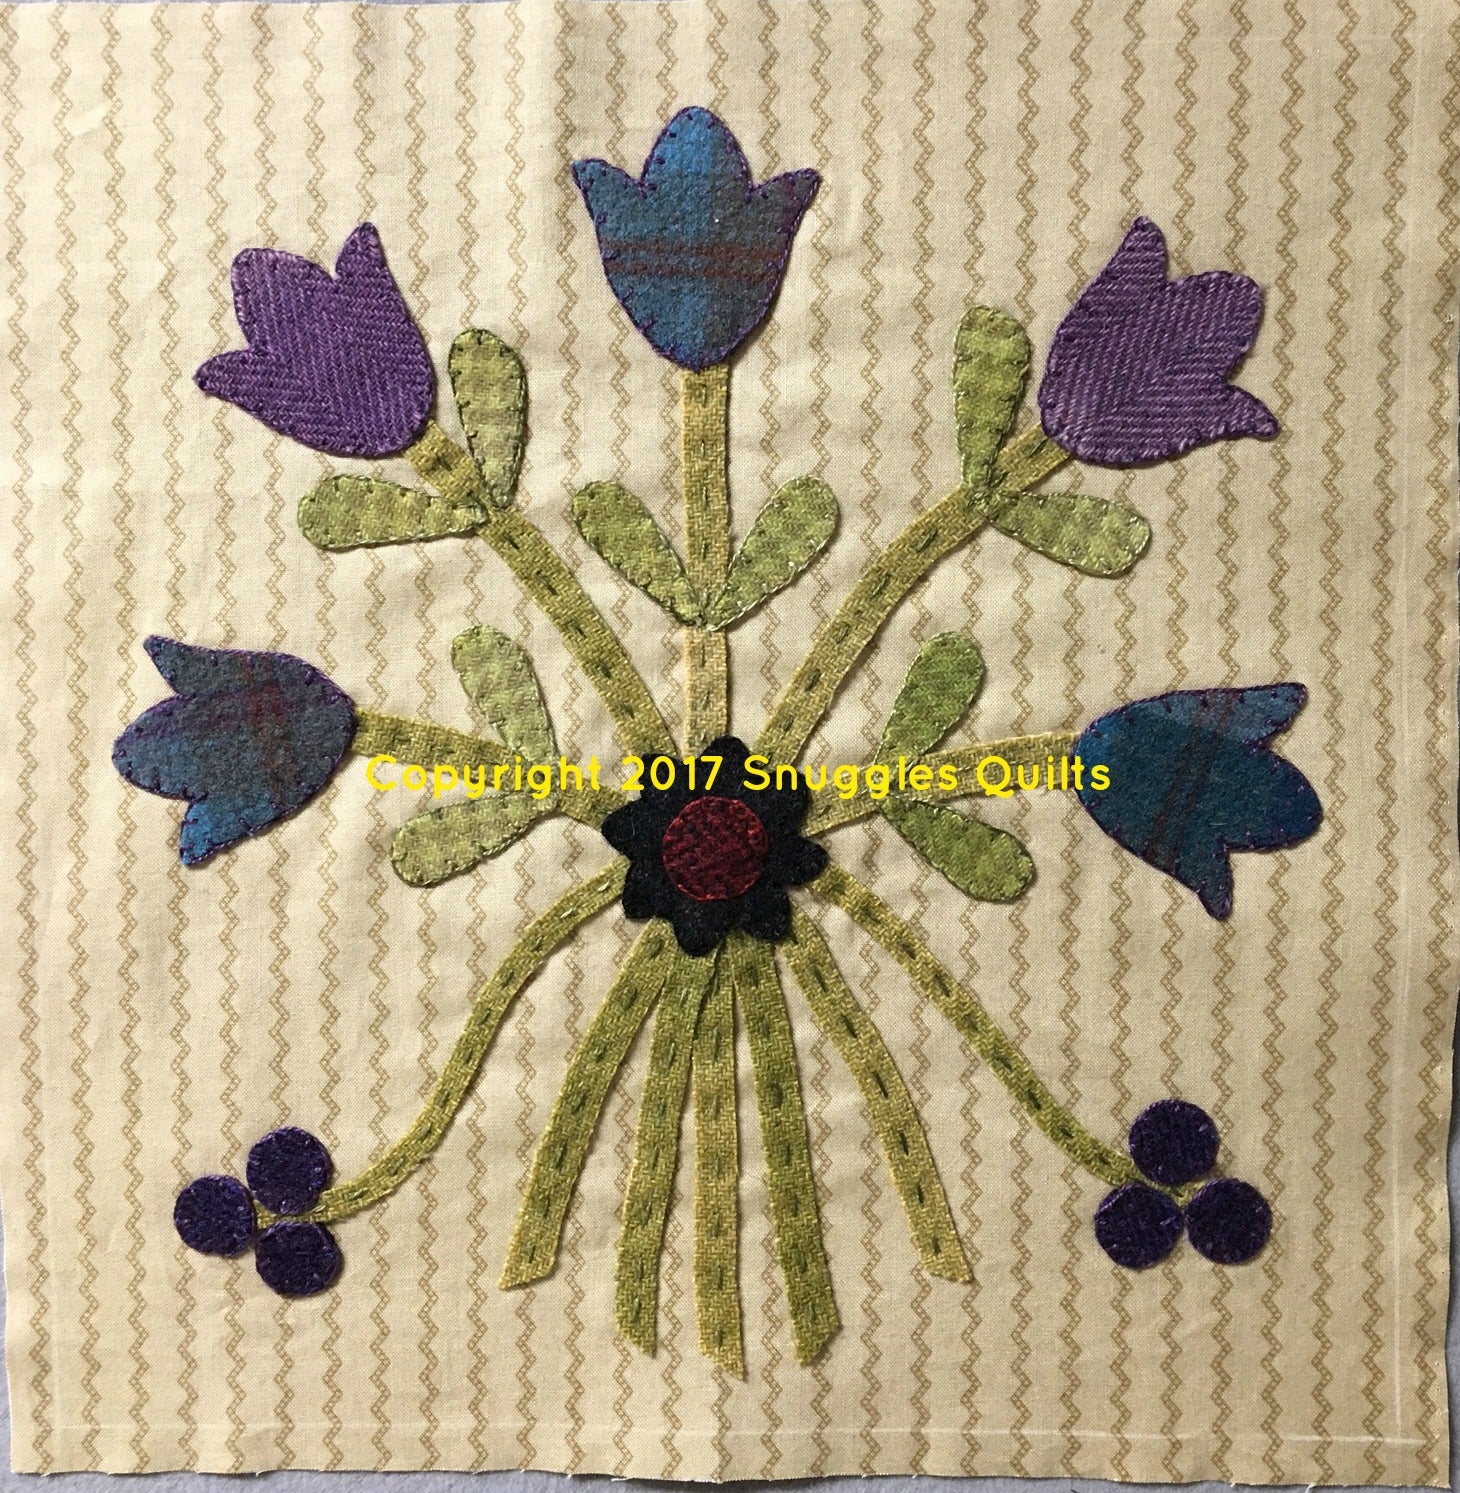 wool applique block for 2017 block of the month by Snuggles Quilts